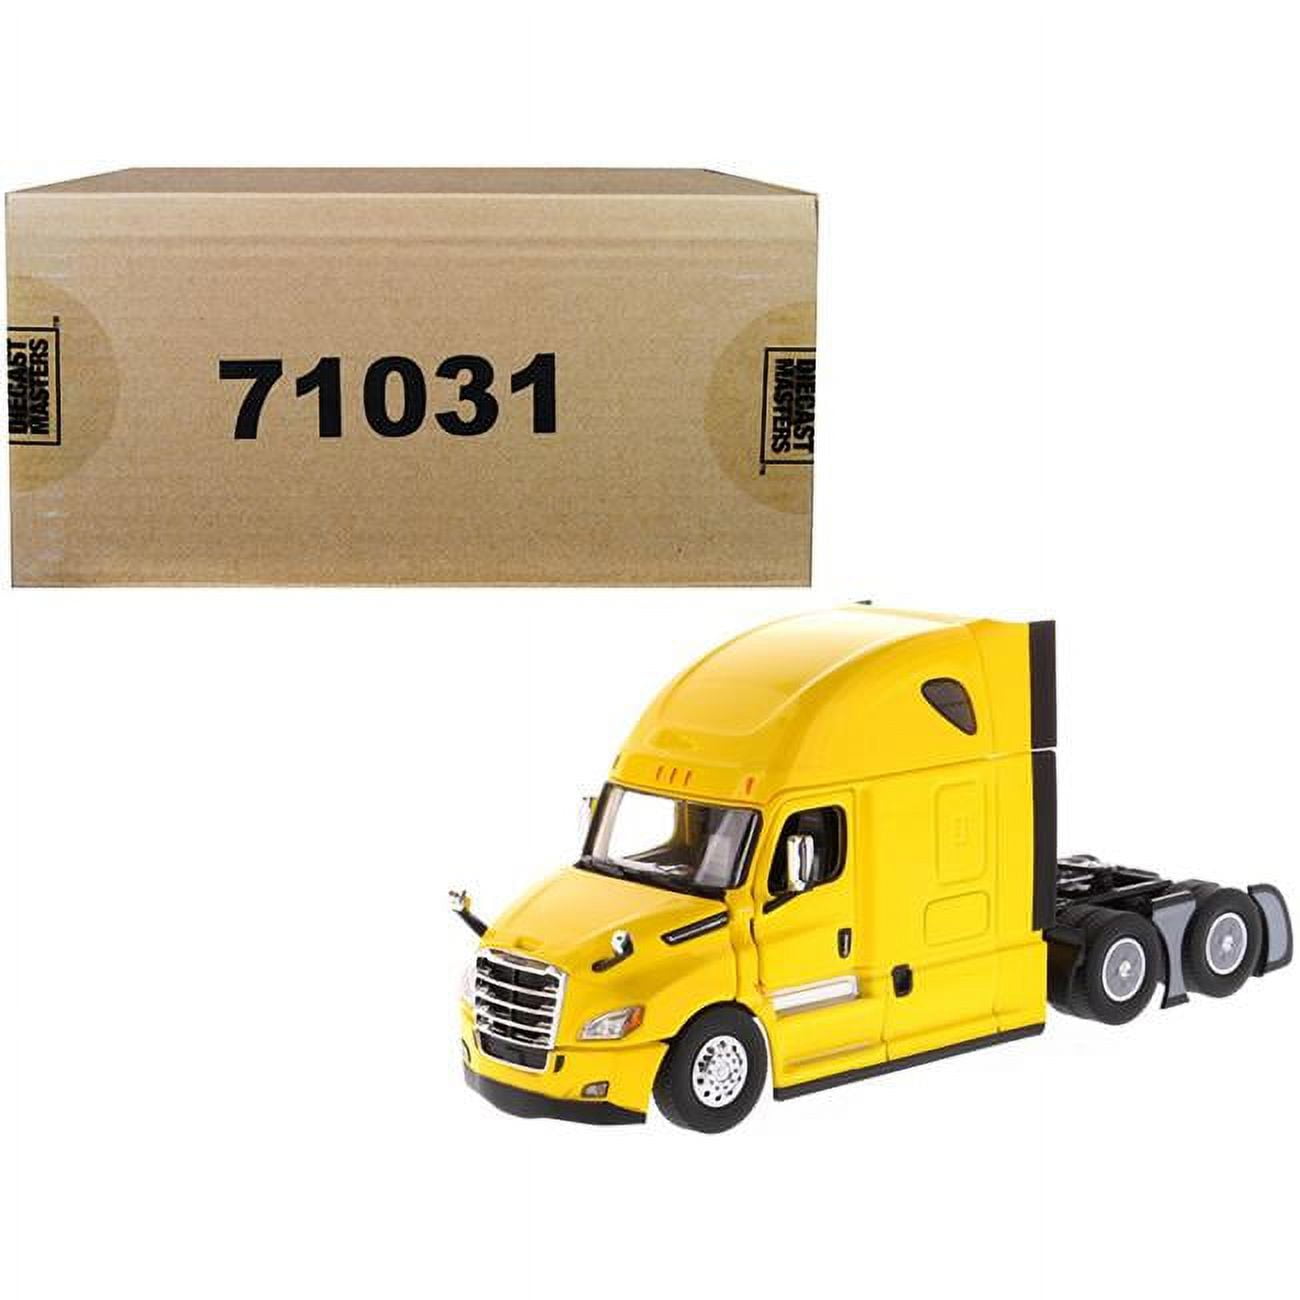 71031 Freightliner New Cascadia Sleeper Cab Truck Tractor 1 By 50 Diecast Model, Yellow